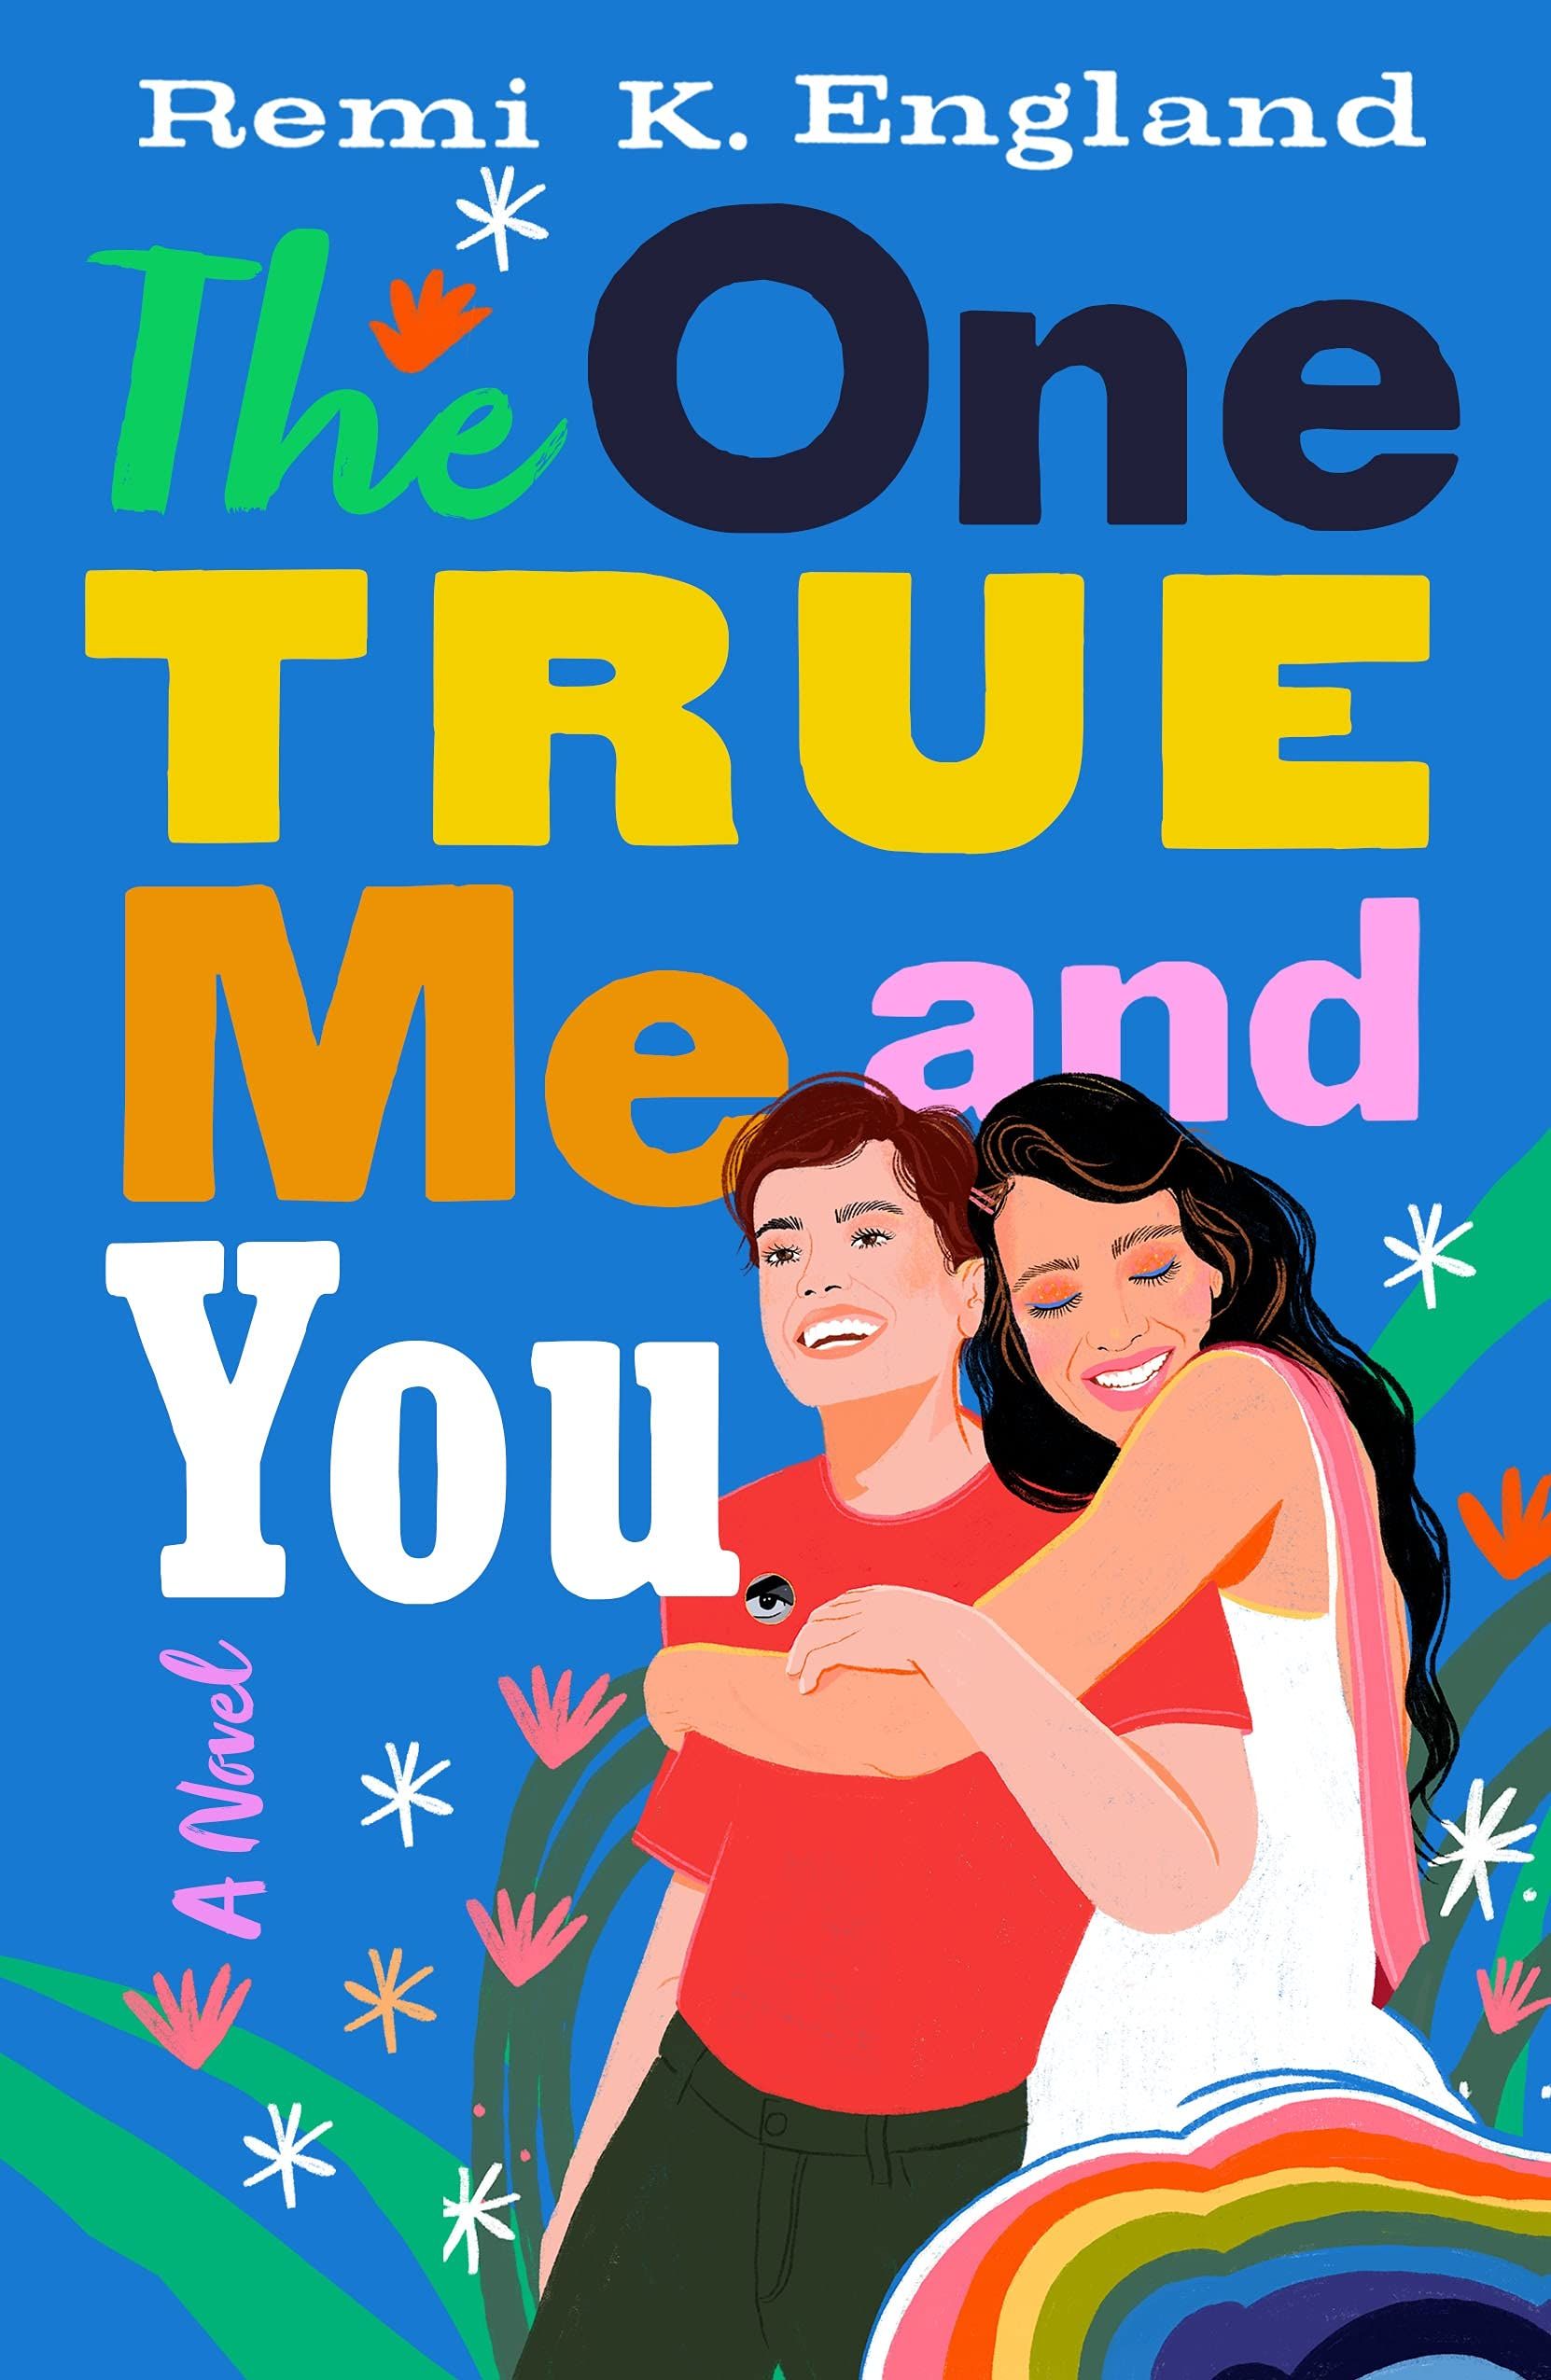 Cover Image of "The One True Me and You" by Remi K. England